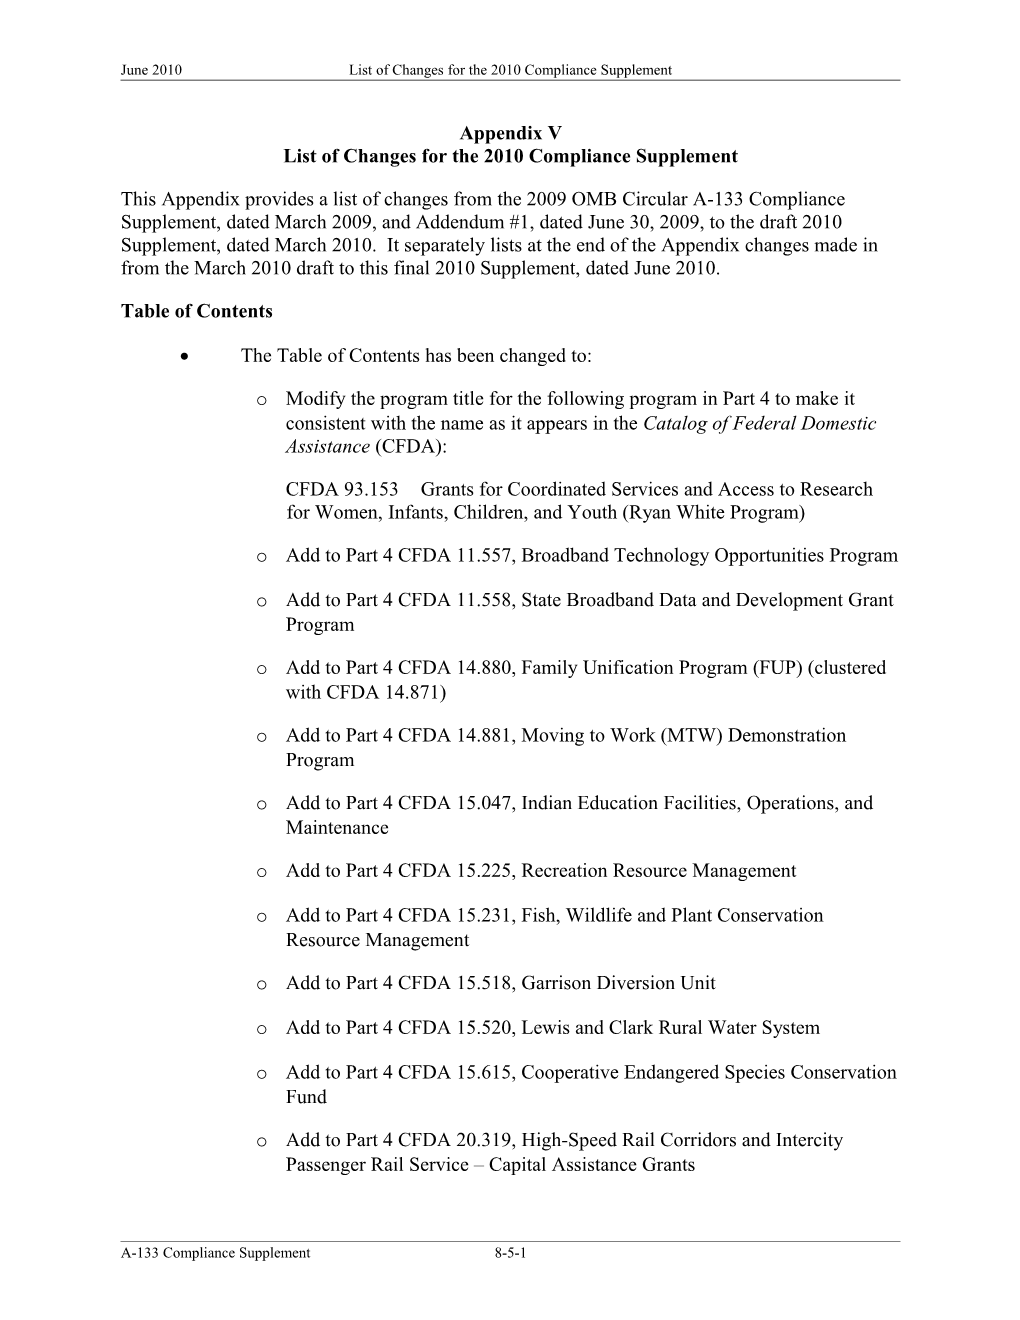 List of Changes for the 2010 Compliance Supplement